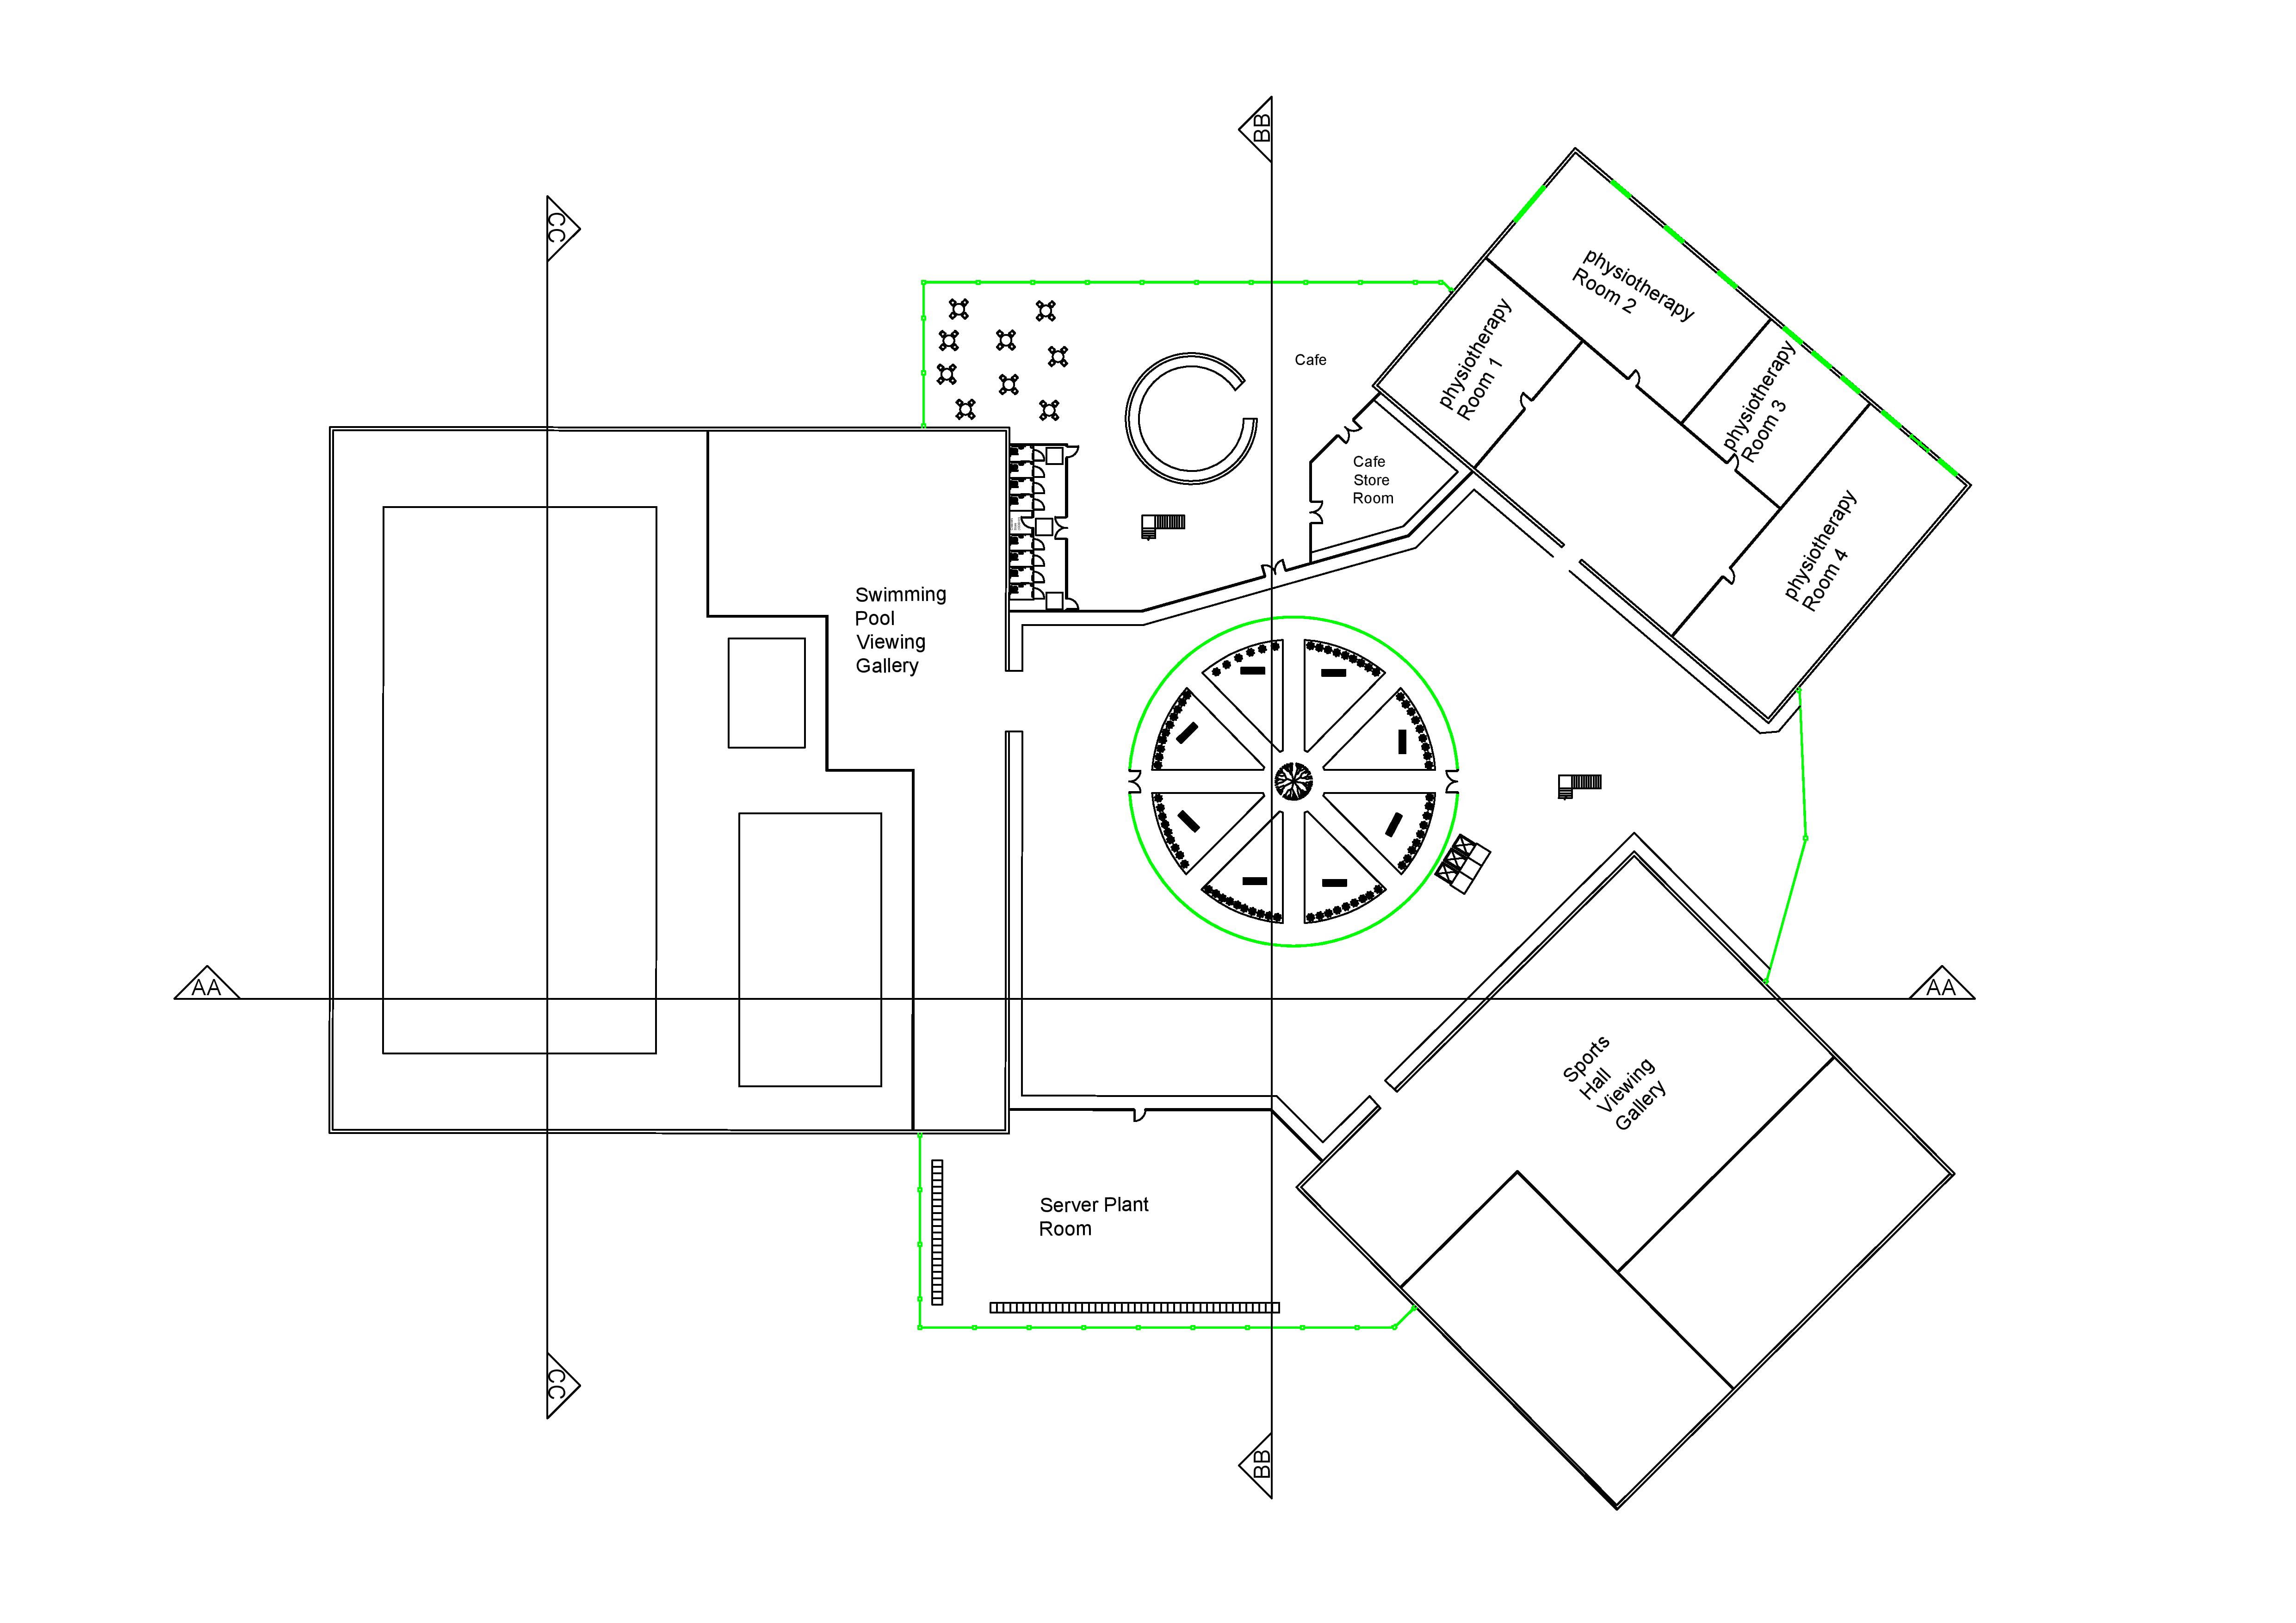 First floor plan for the building.